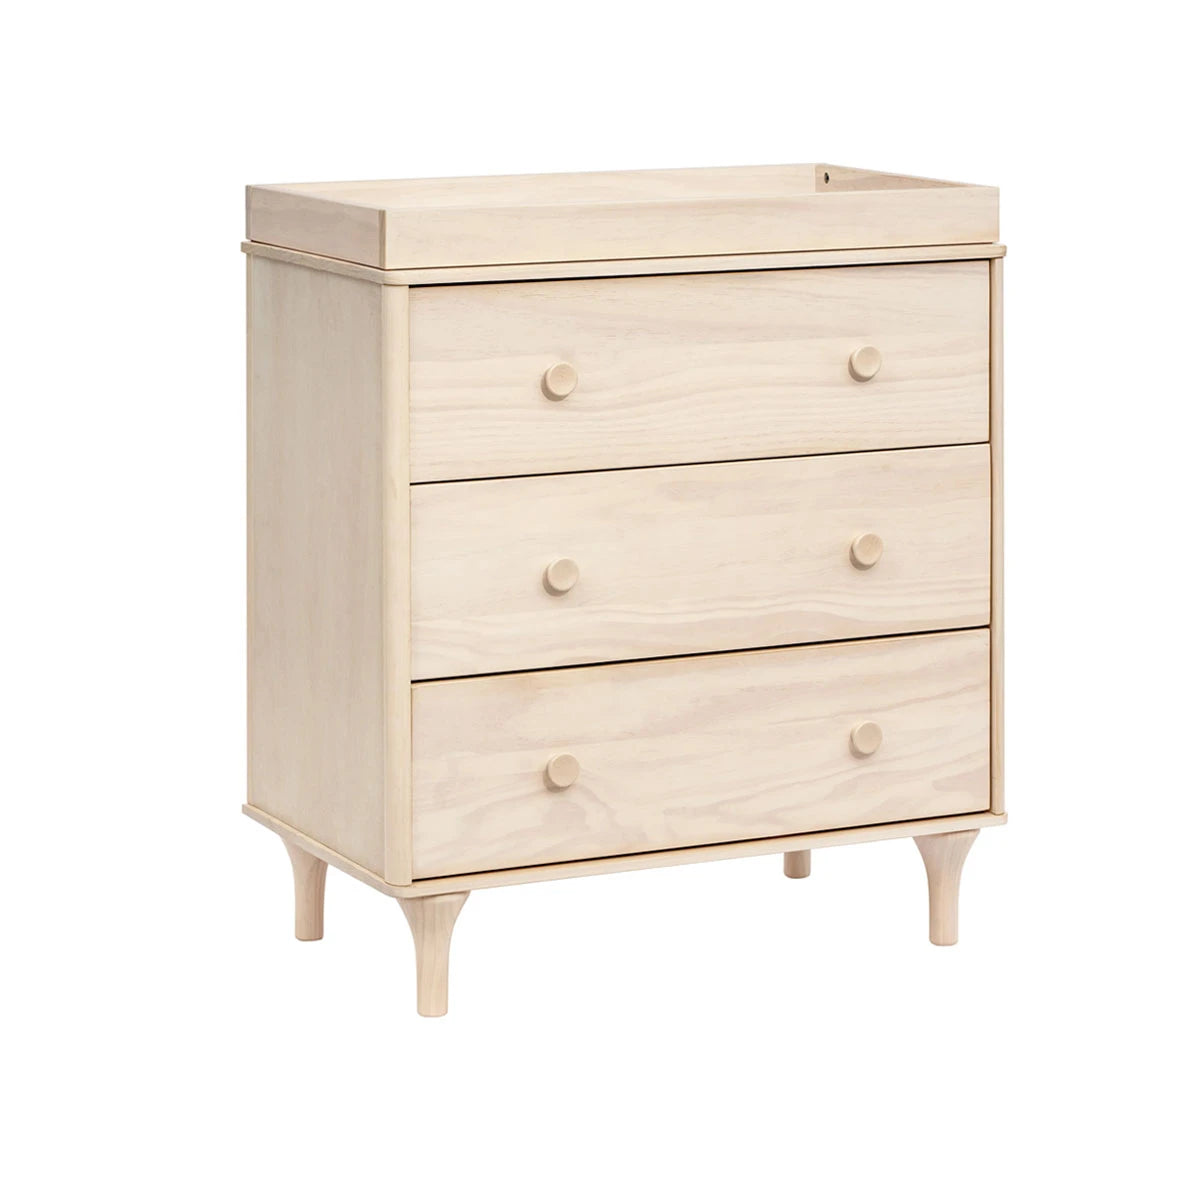 Babyletto change table White with Natural - Babyletto Lolly Dresser Babyletto Lolly 3-Drawer Changer Dresser